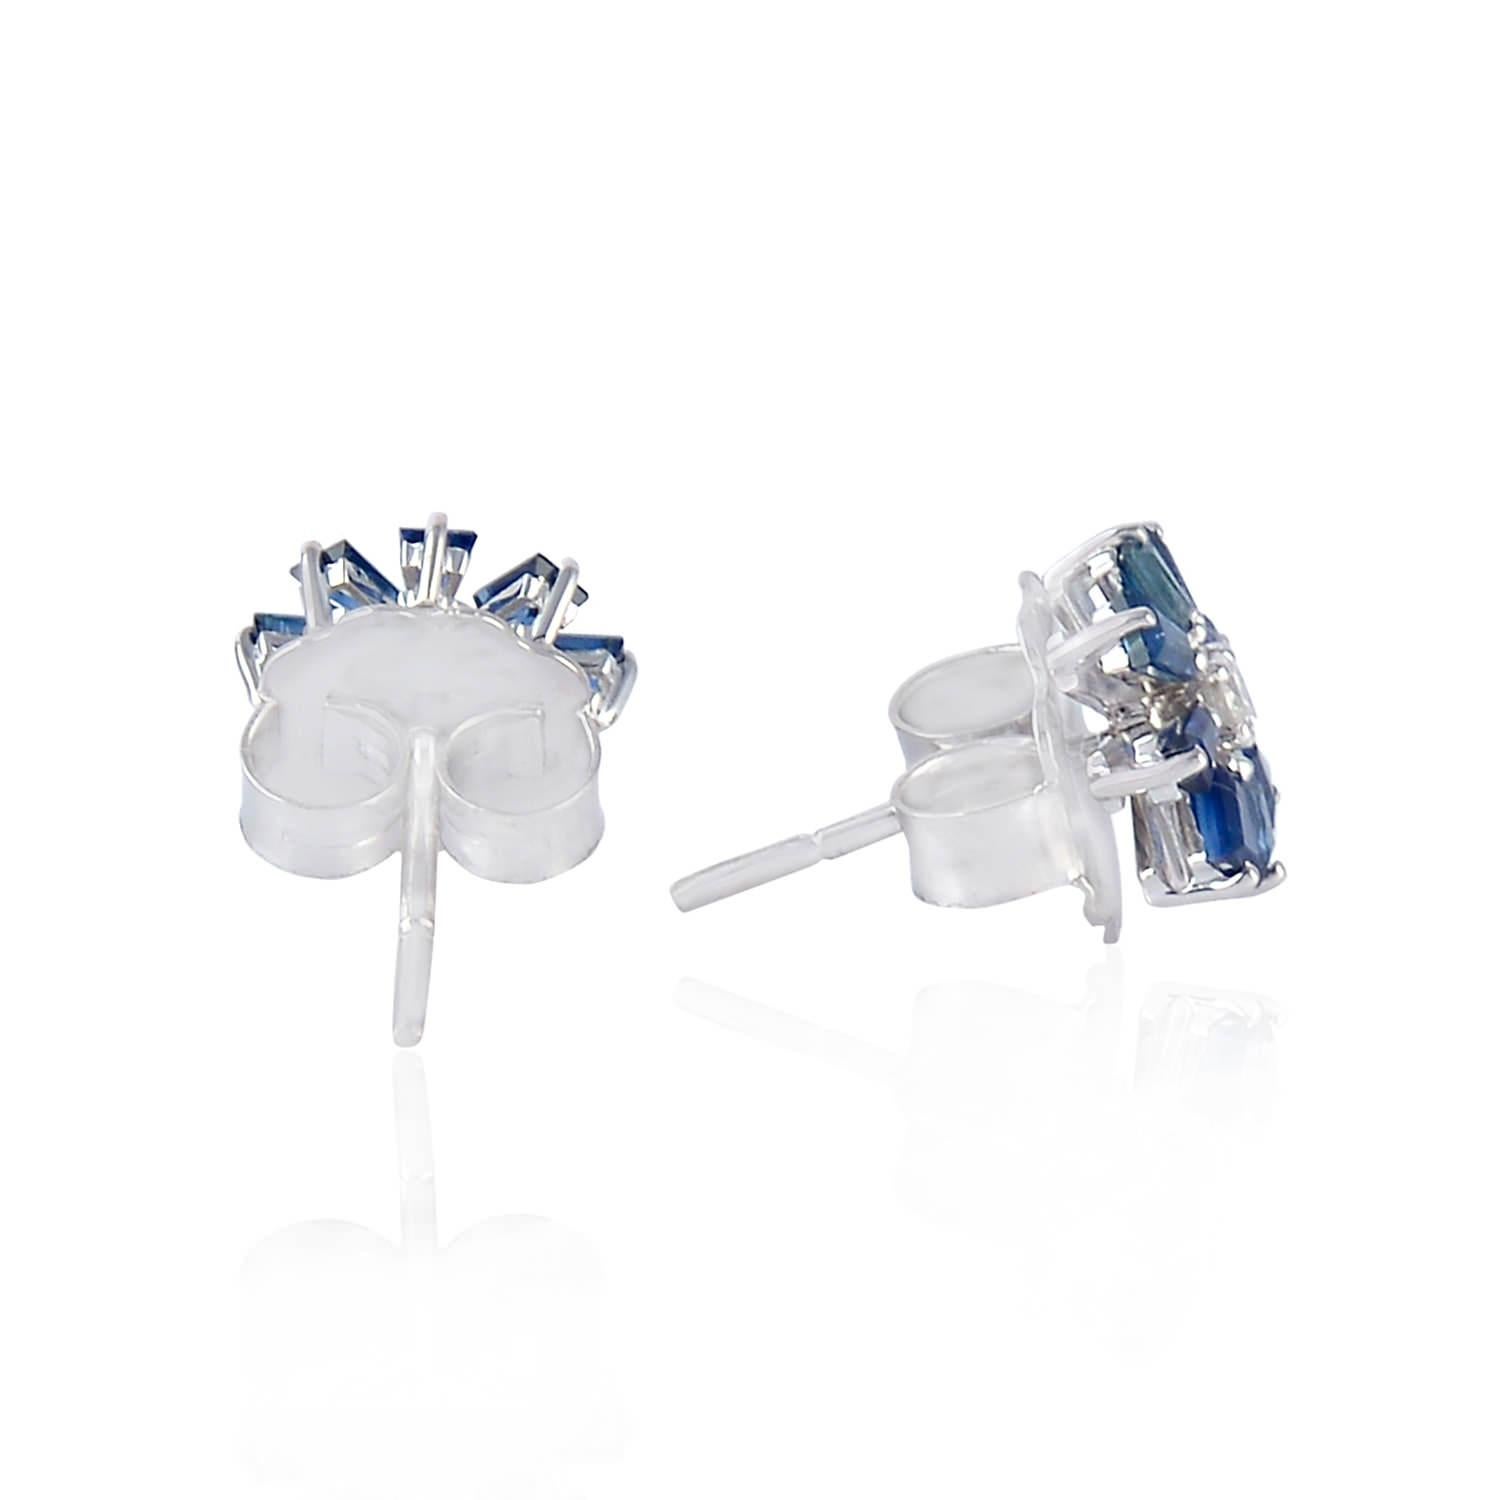 Cast from 18-karat white gold, these studs earrings are hand set with 1.16 carats baguette blue sapphire and .10 carats of diamond.

FOLLOW  MEGHNA JEWELS storefront to view the latest collection & exclusive pieces.  Meghna Jewels is proudly rated